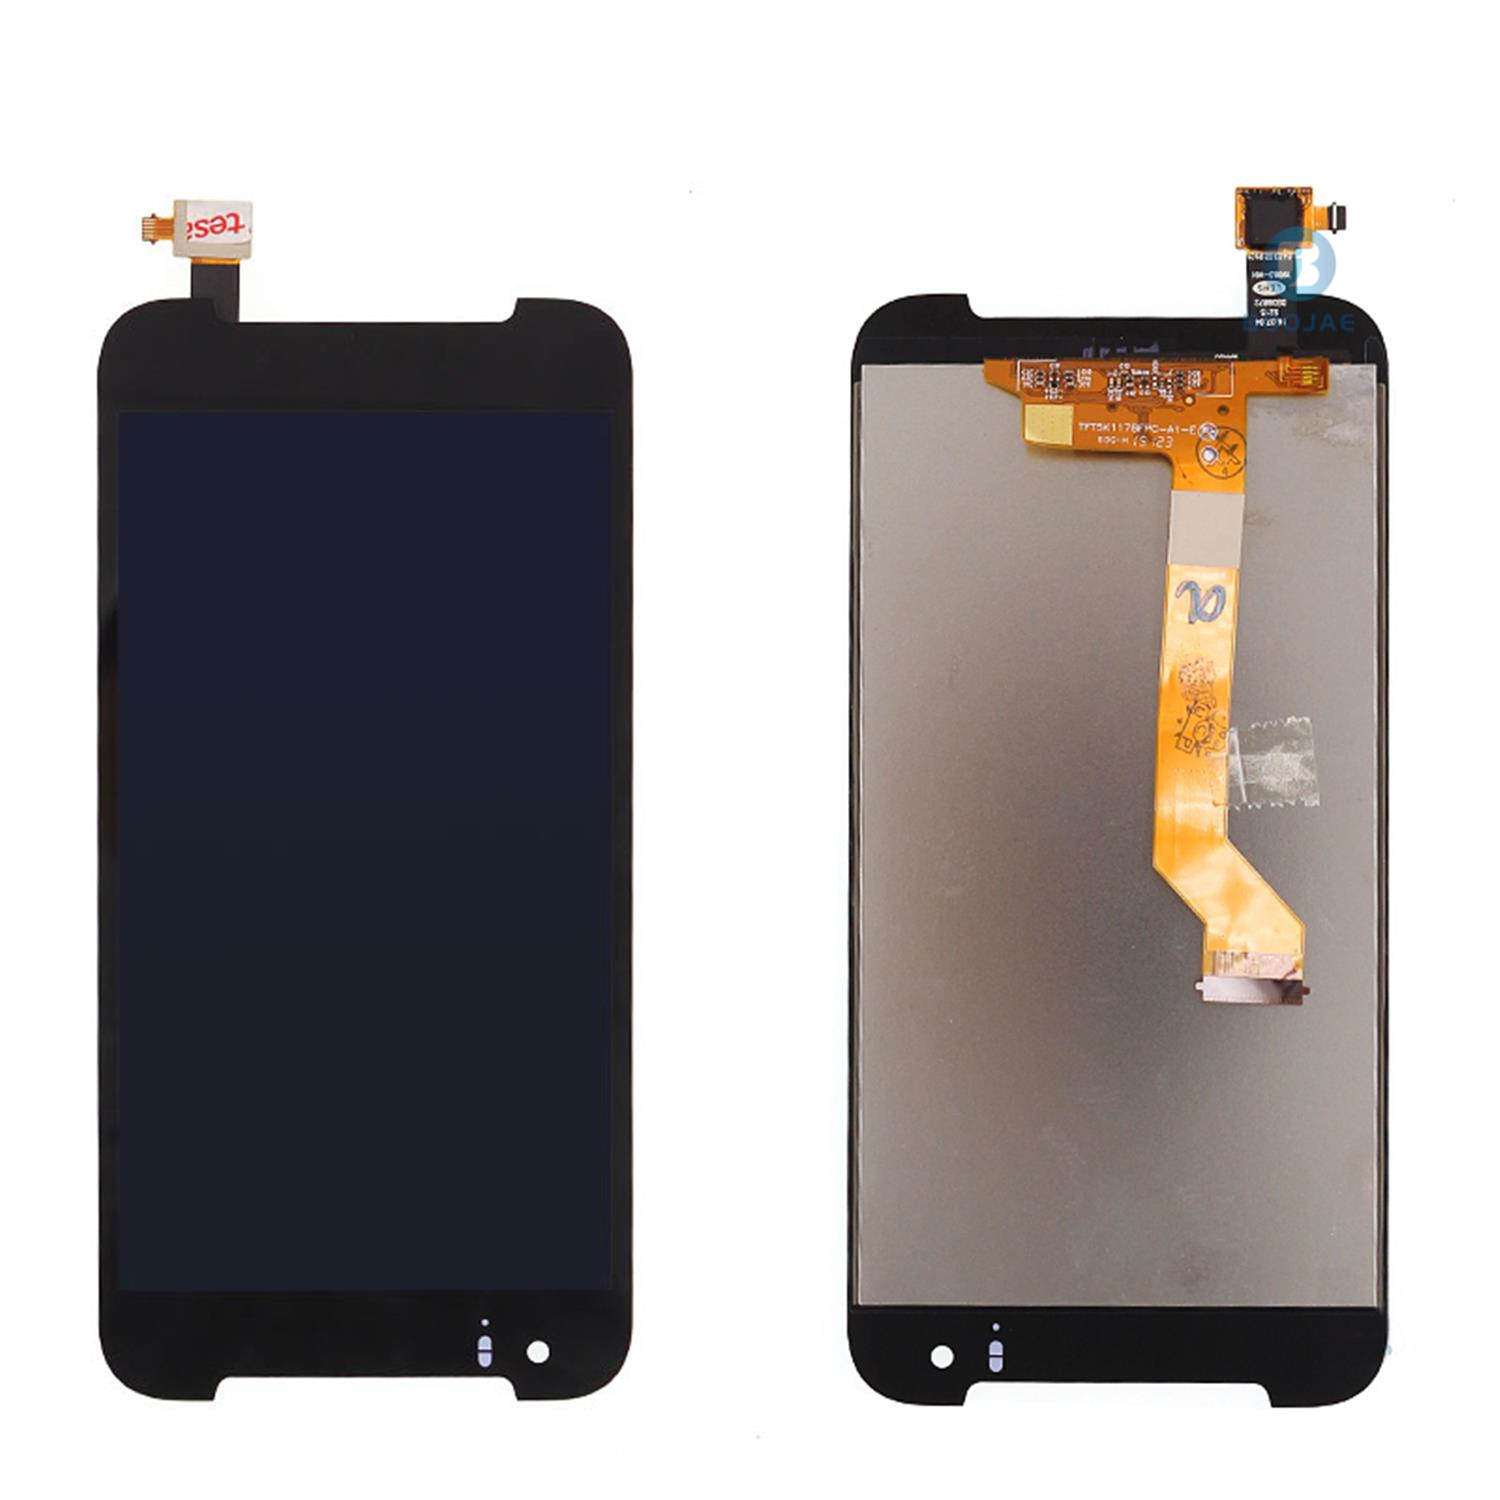 For HTC Desire 830 LCD Screen Display and Touch Panel Digitizer Assembly Replacement